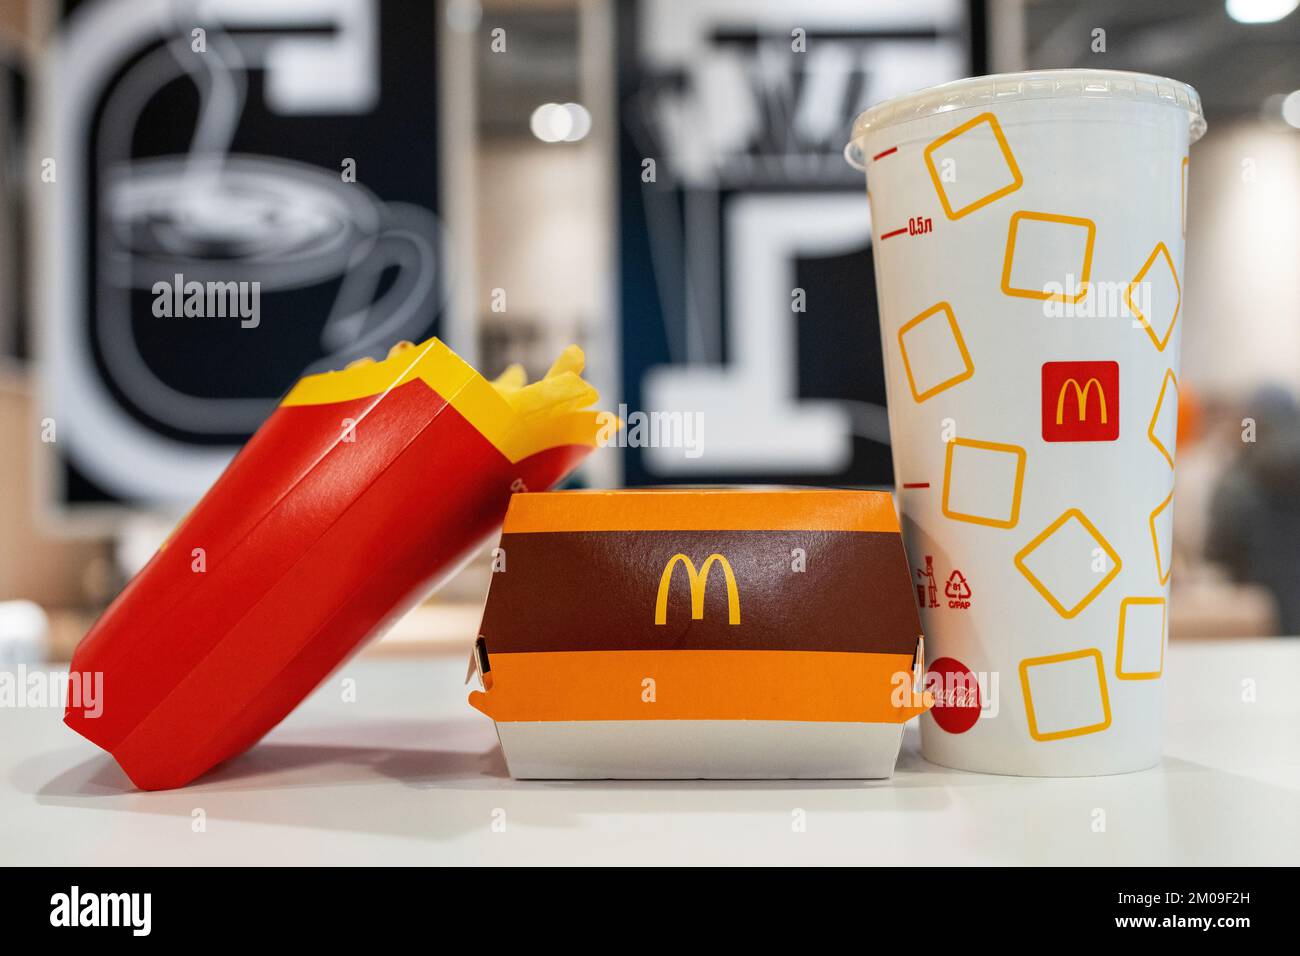 Big Mac Box with McDonald's logo, French Fries and soft drink on table in McDonald's Restaurant. Stock Photo